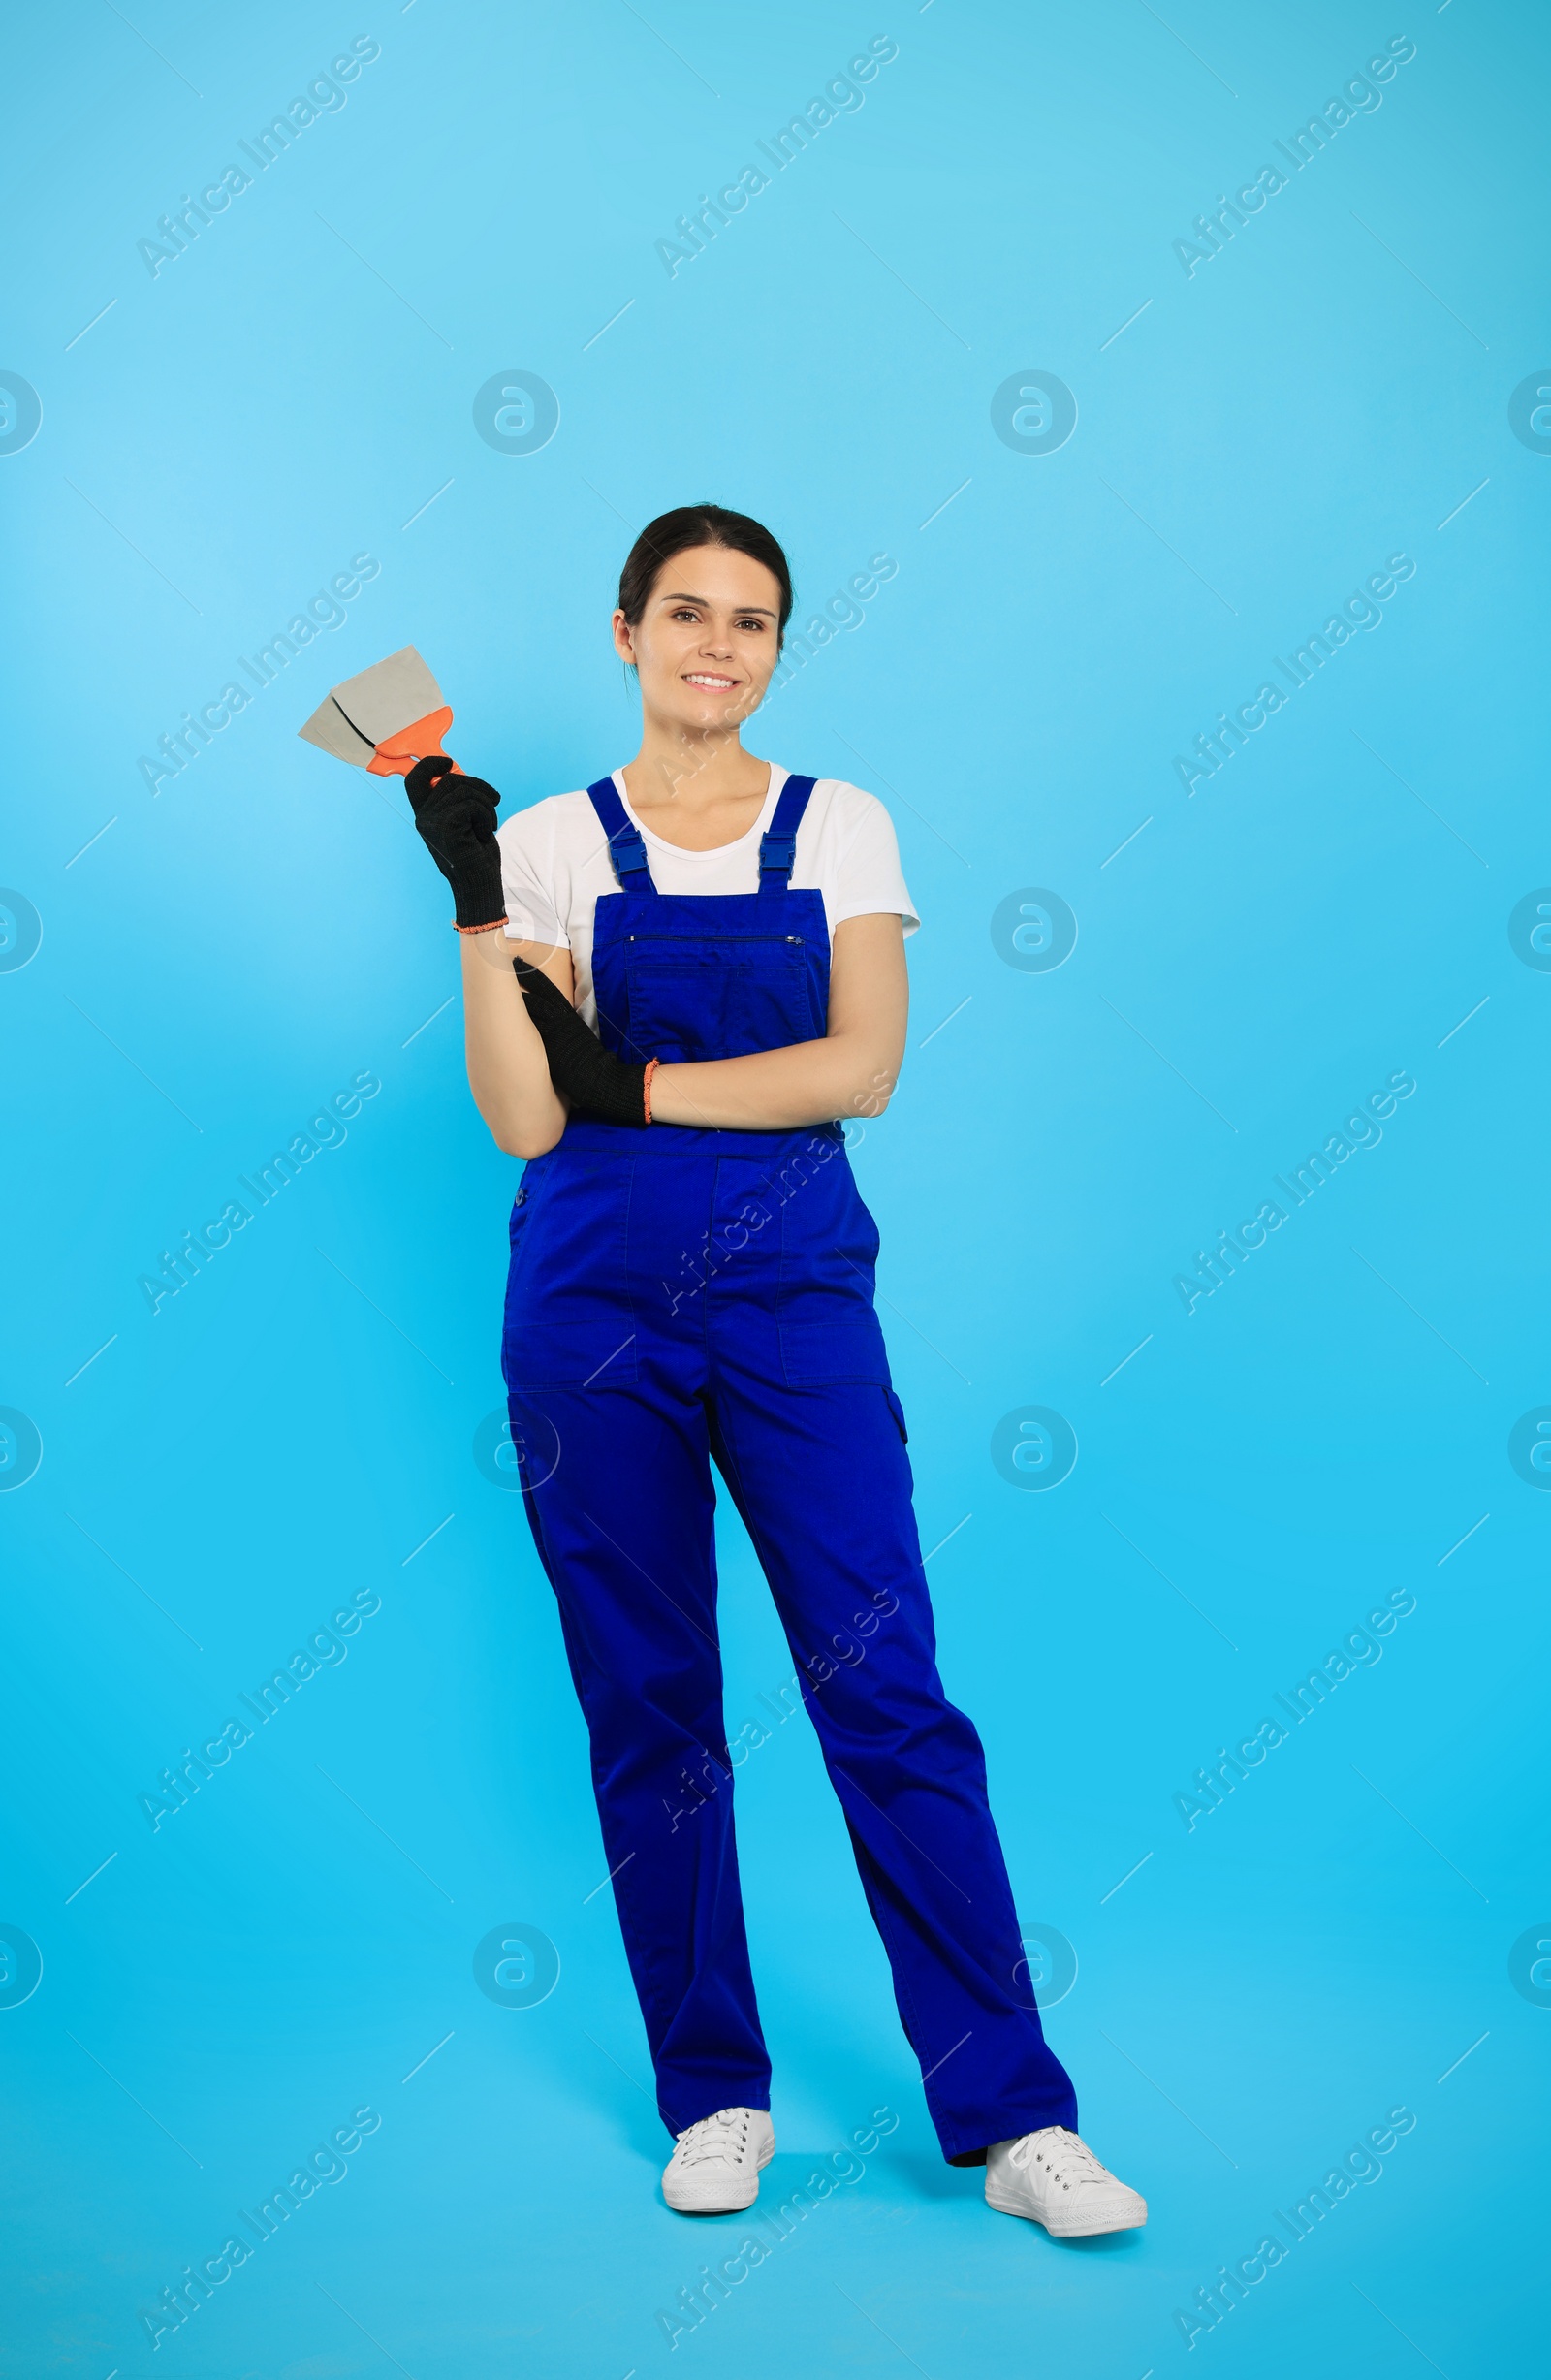 Photo of Professional worker with putty knife on light blue background